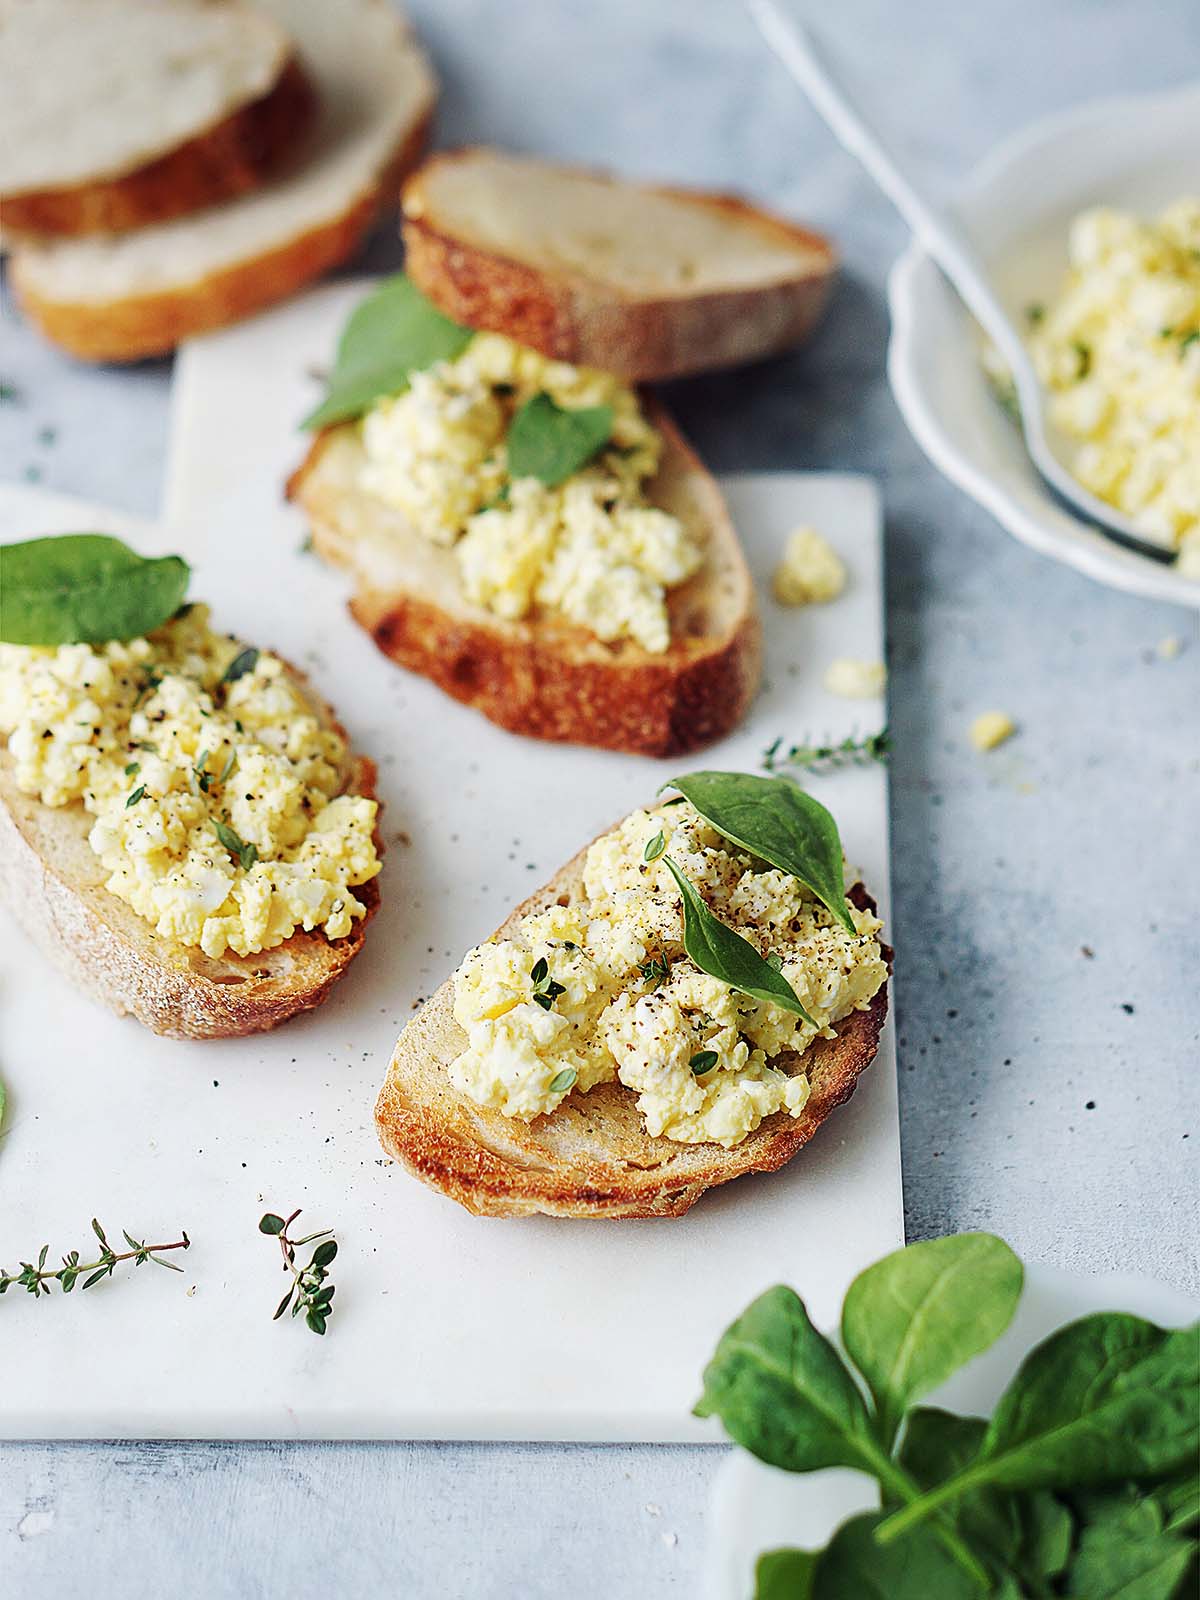 Two small toasts topped with egg salad and garnished with spinach leaves.